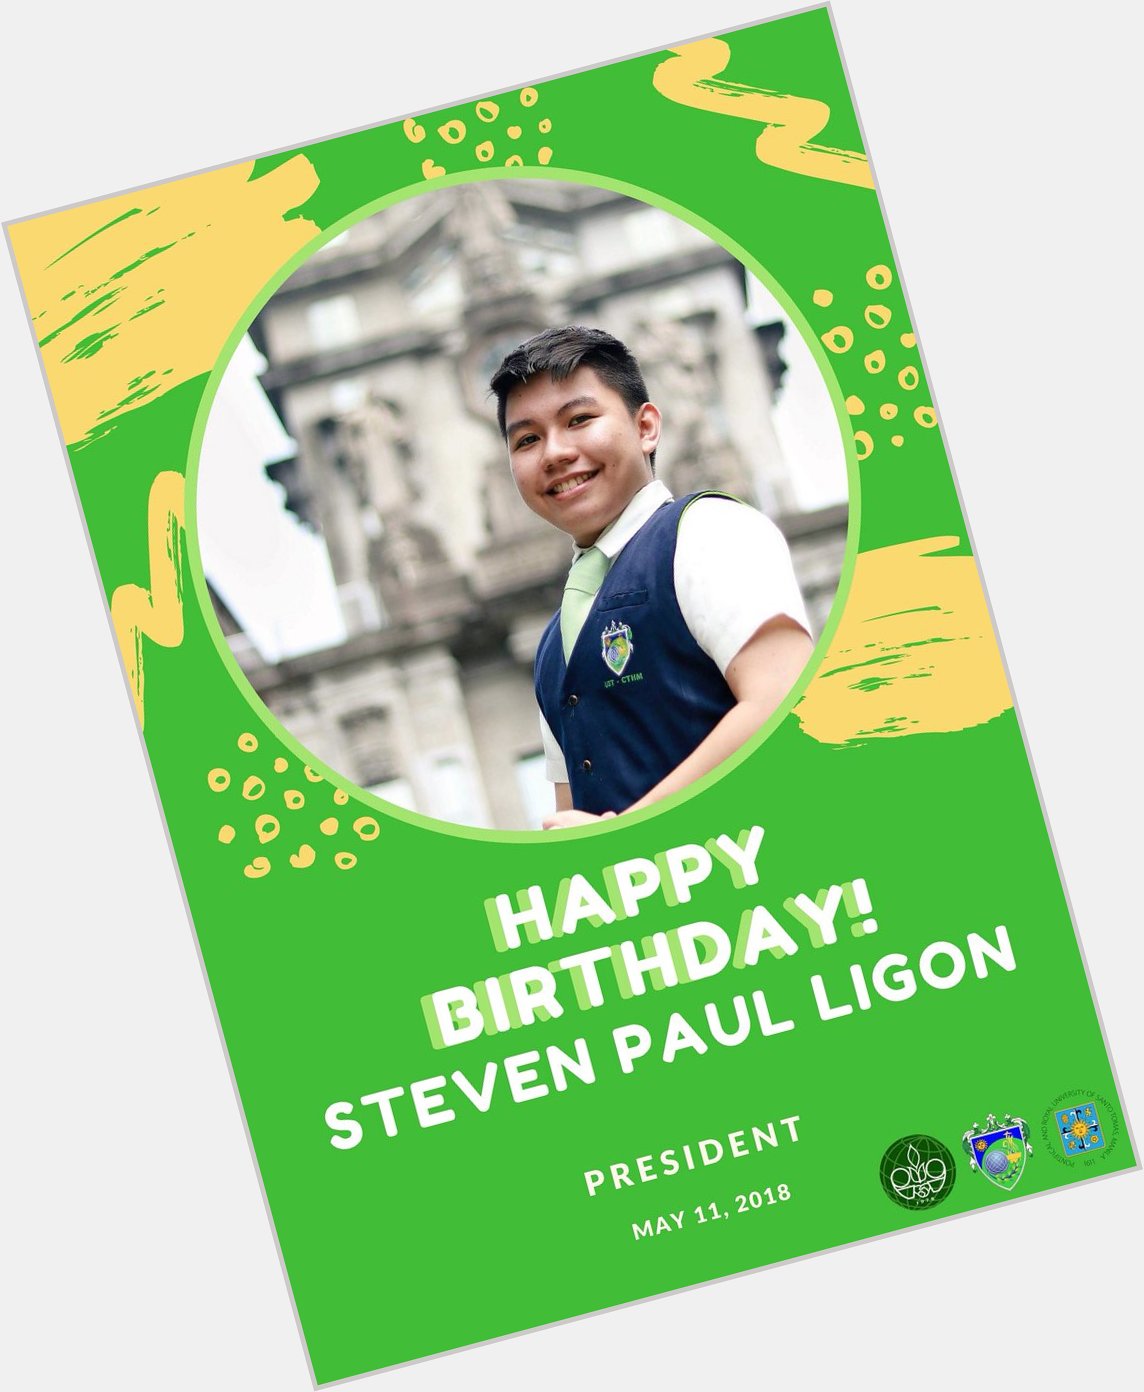 Happy Birthday to our President, Steven Paul Ligon! Your COMACH CTHM family loves you!  